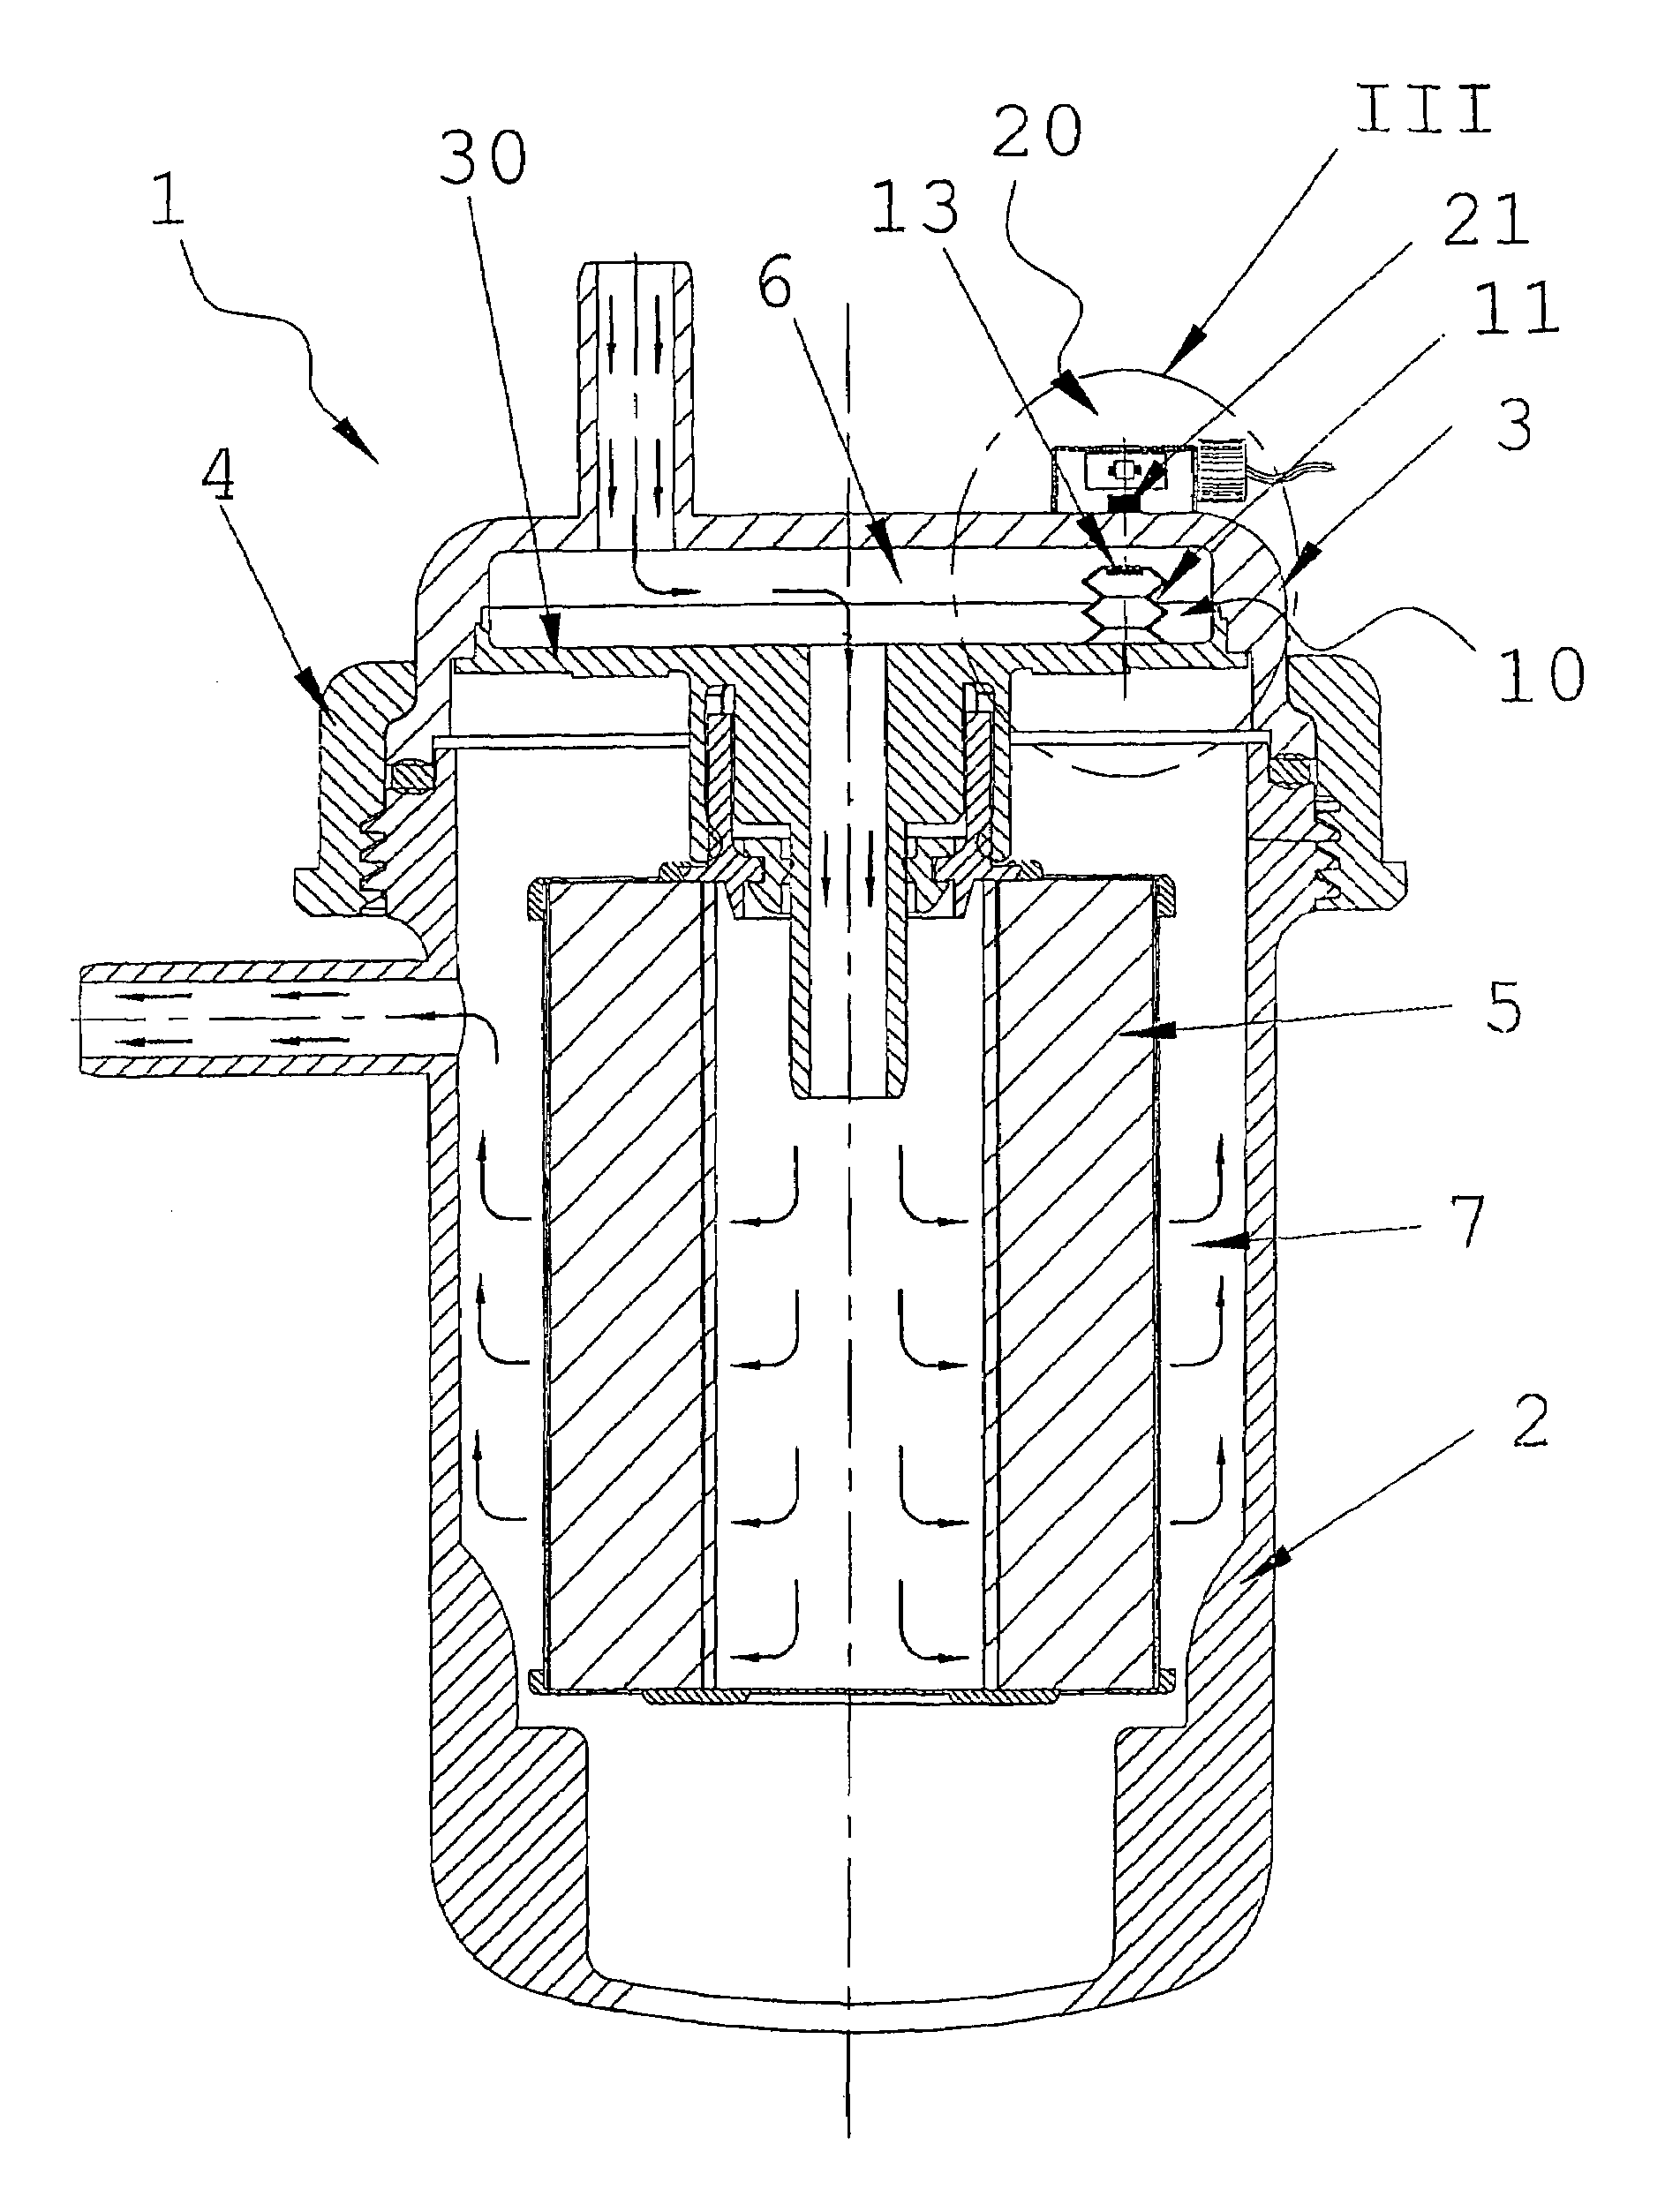 Device for indicating fuel filter clogging in internal combustion engines, particularly diesel engines